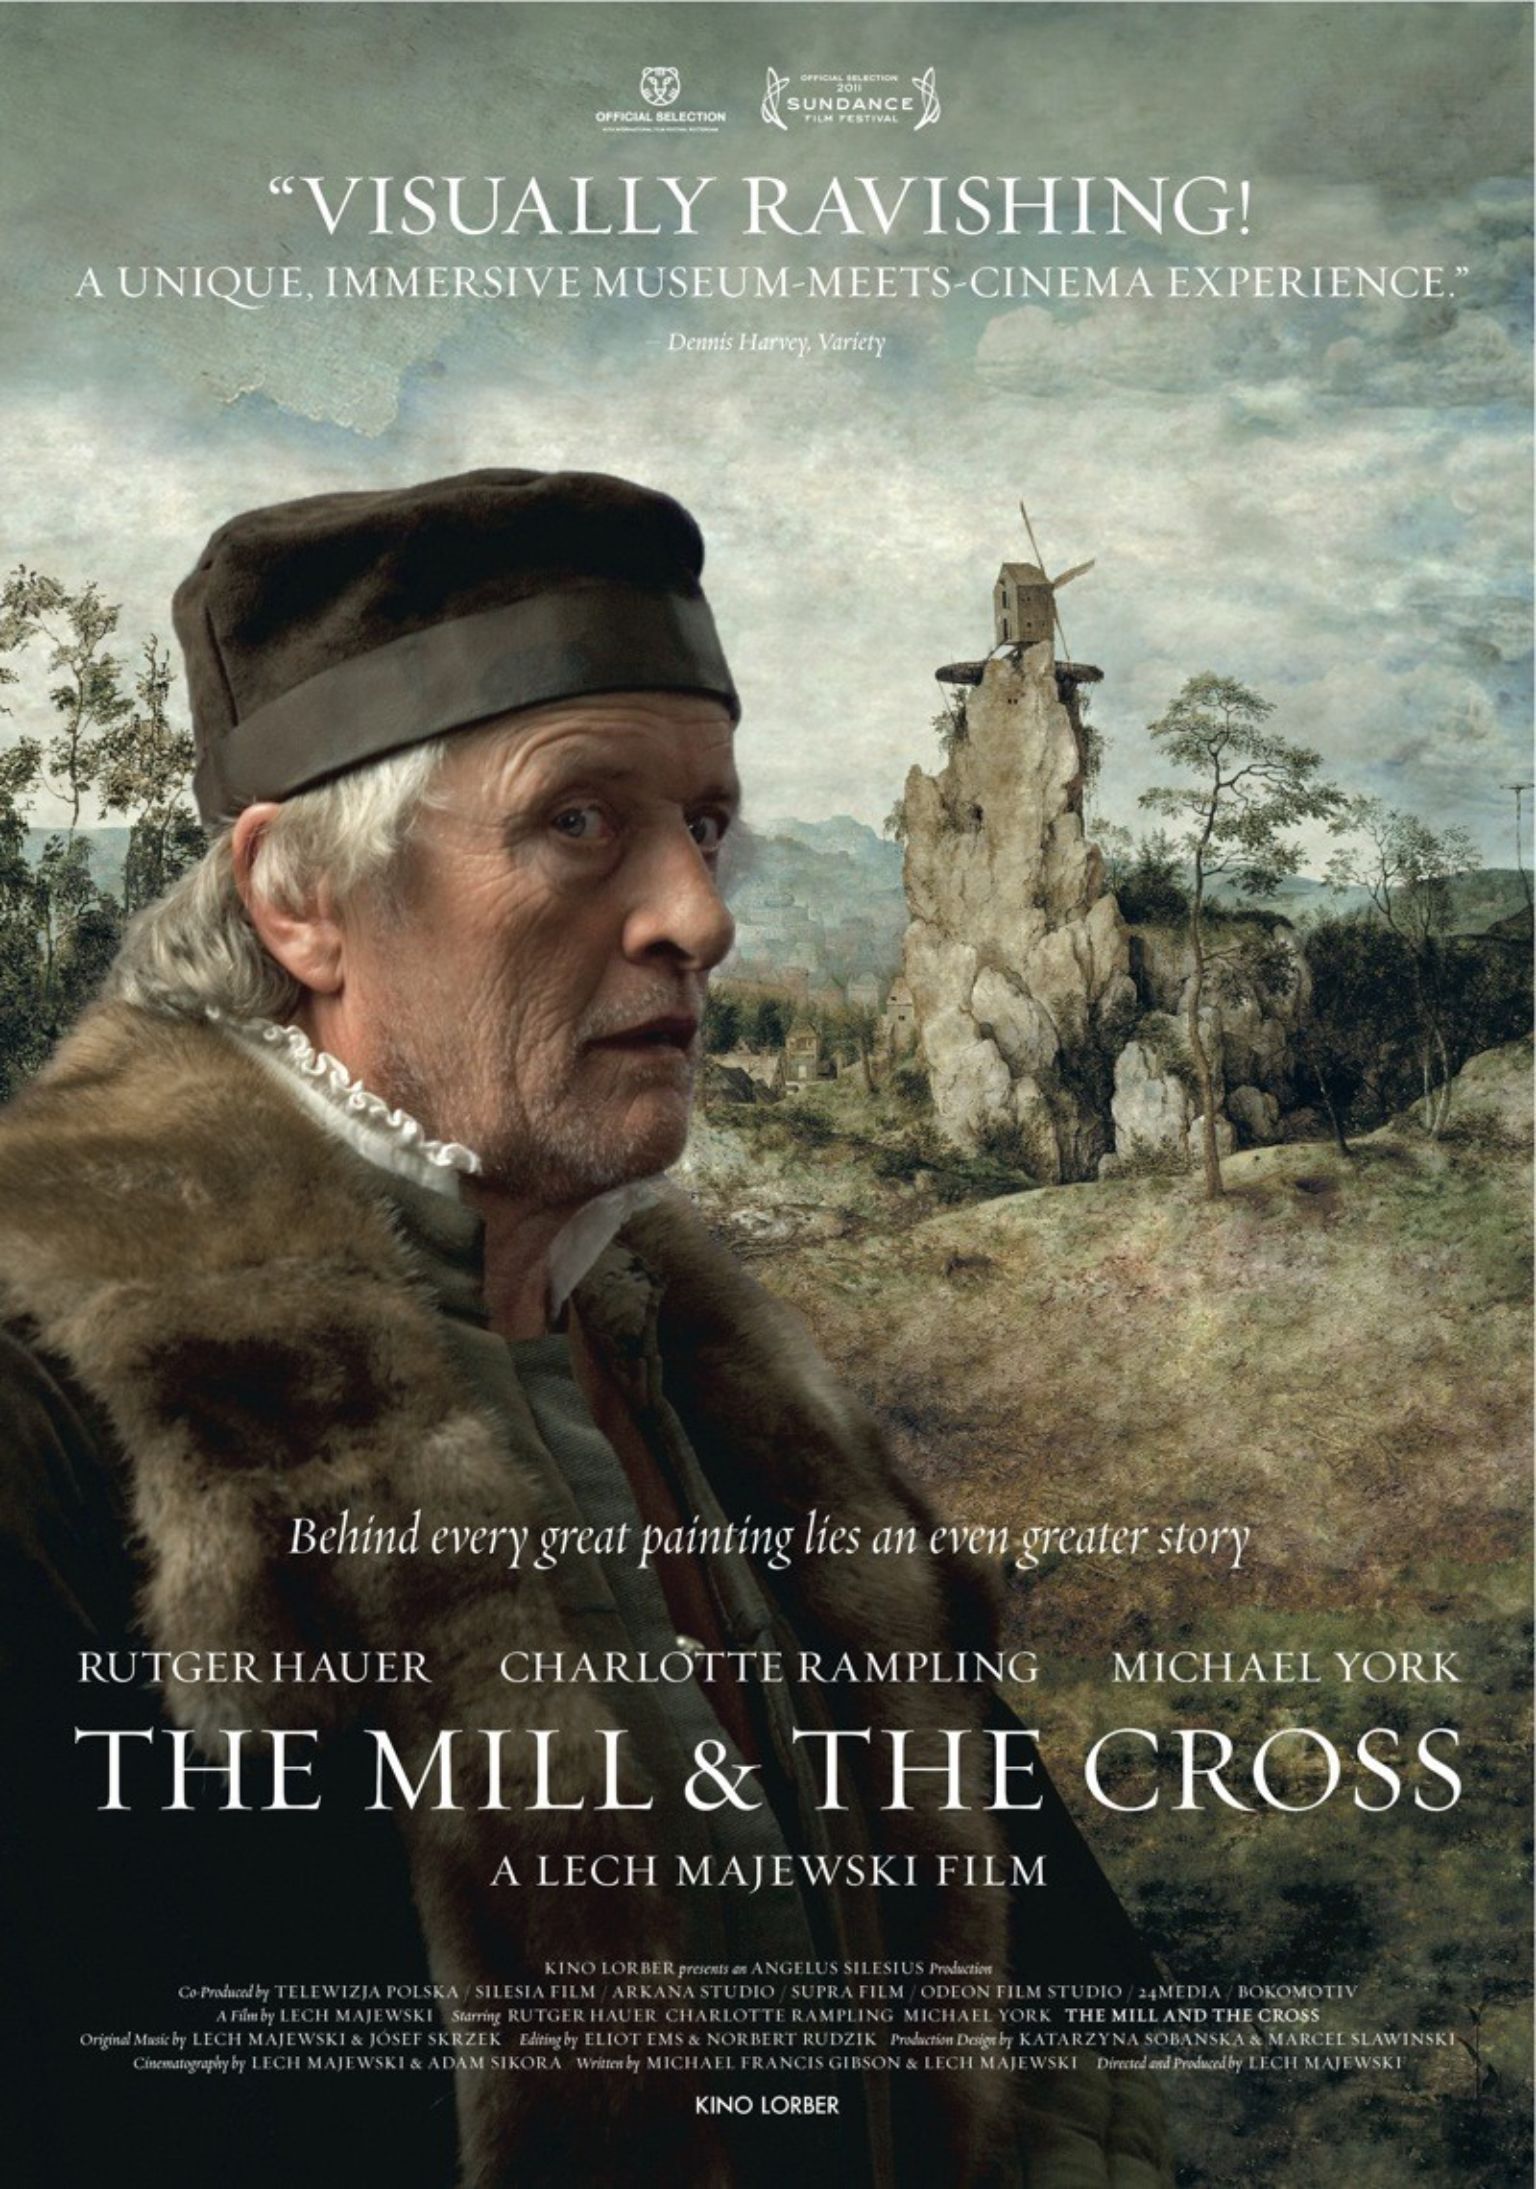 Film: The Mill & The Cross